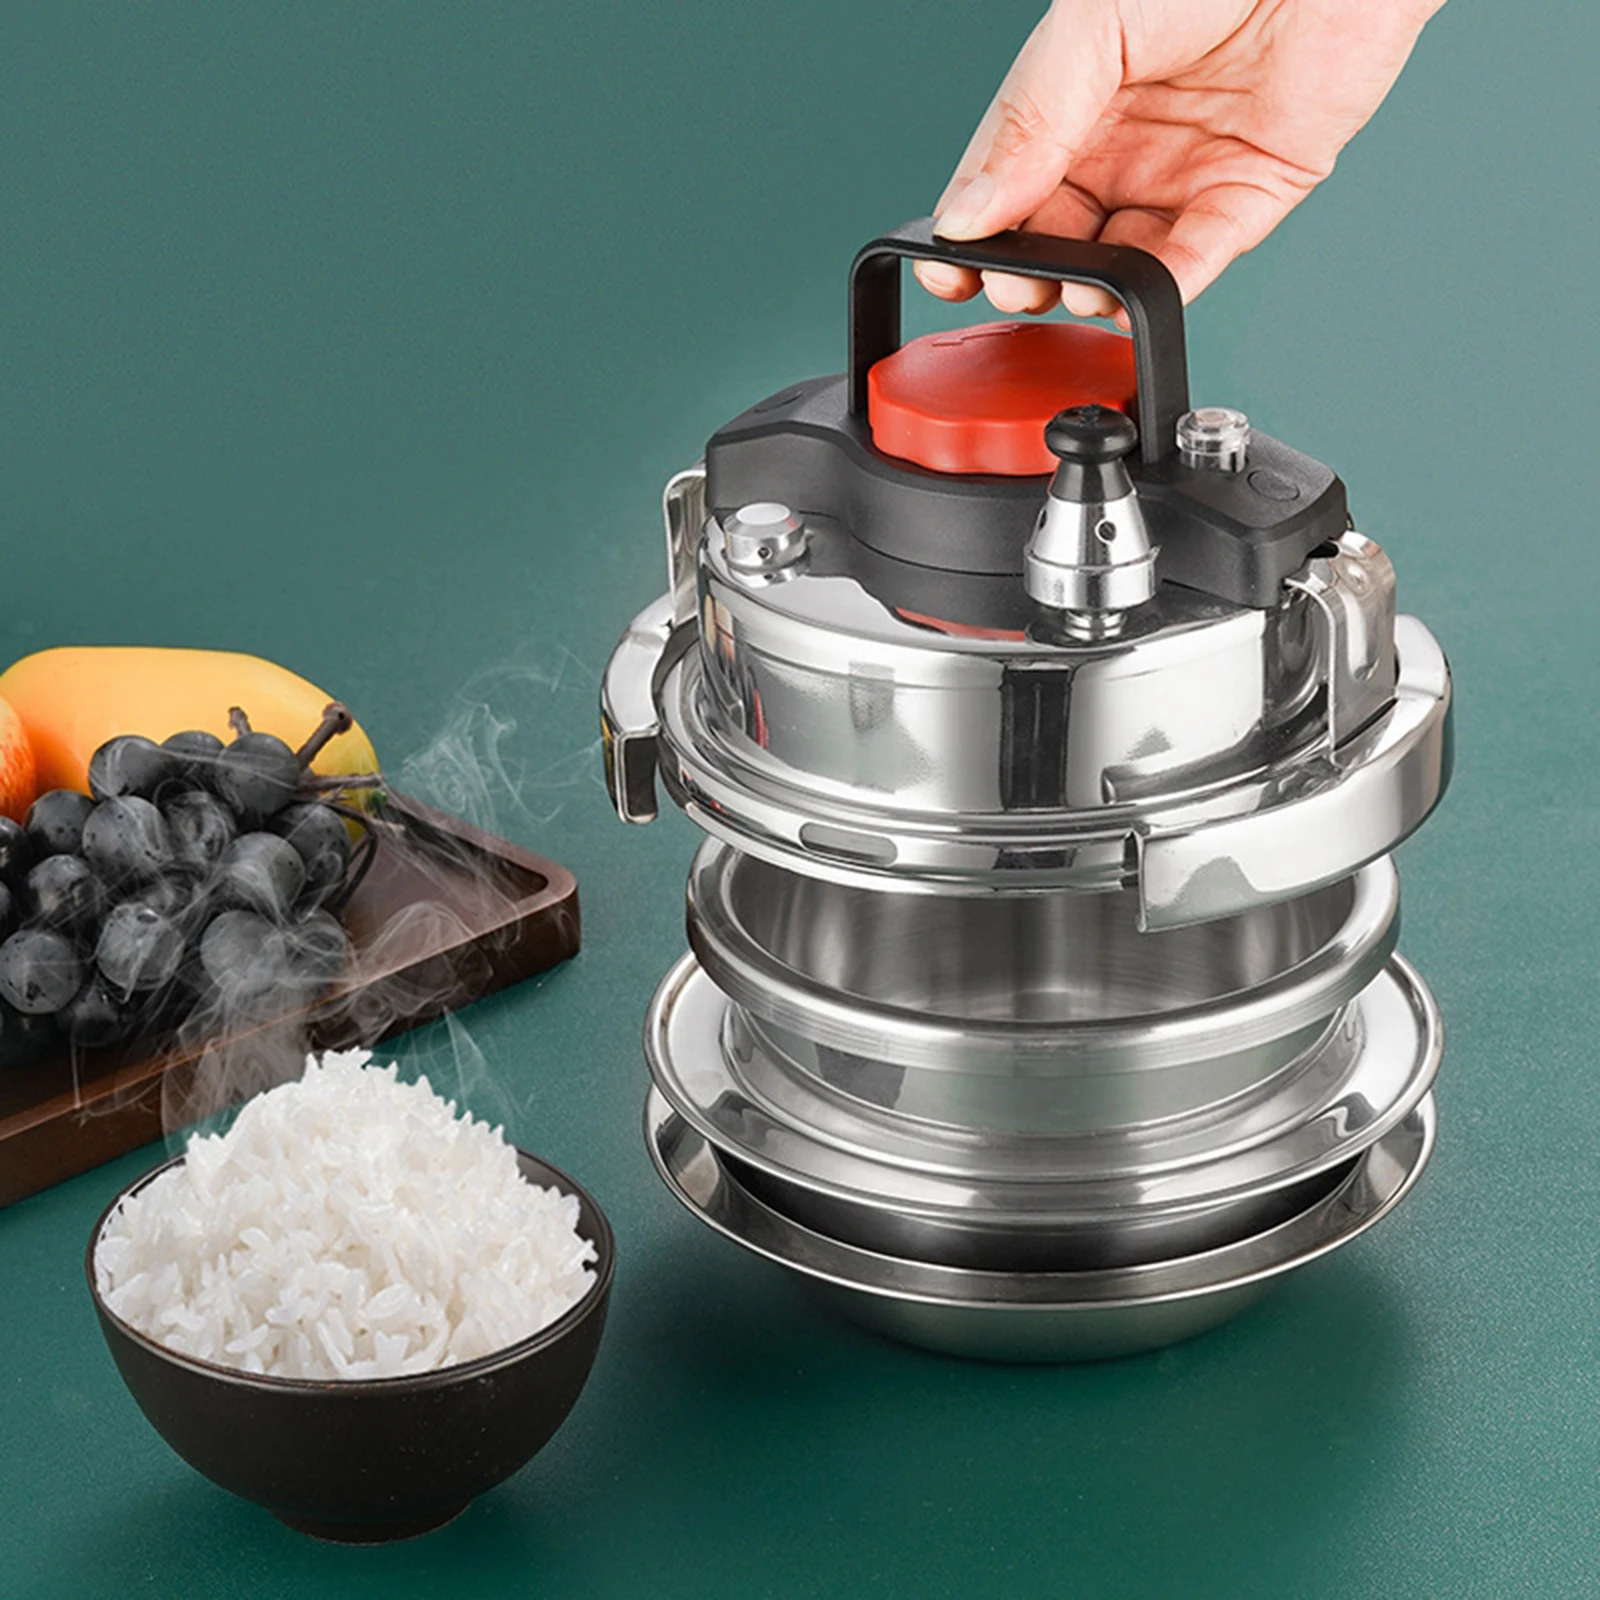 MOEYE 1.4L/1.6L Mini Pressure Cooker Stainless Steel Outdoor Camping Micro Pressure Cooker Household Mini Rice Cooker